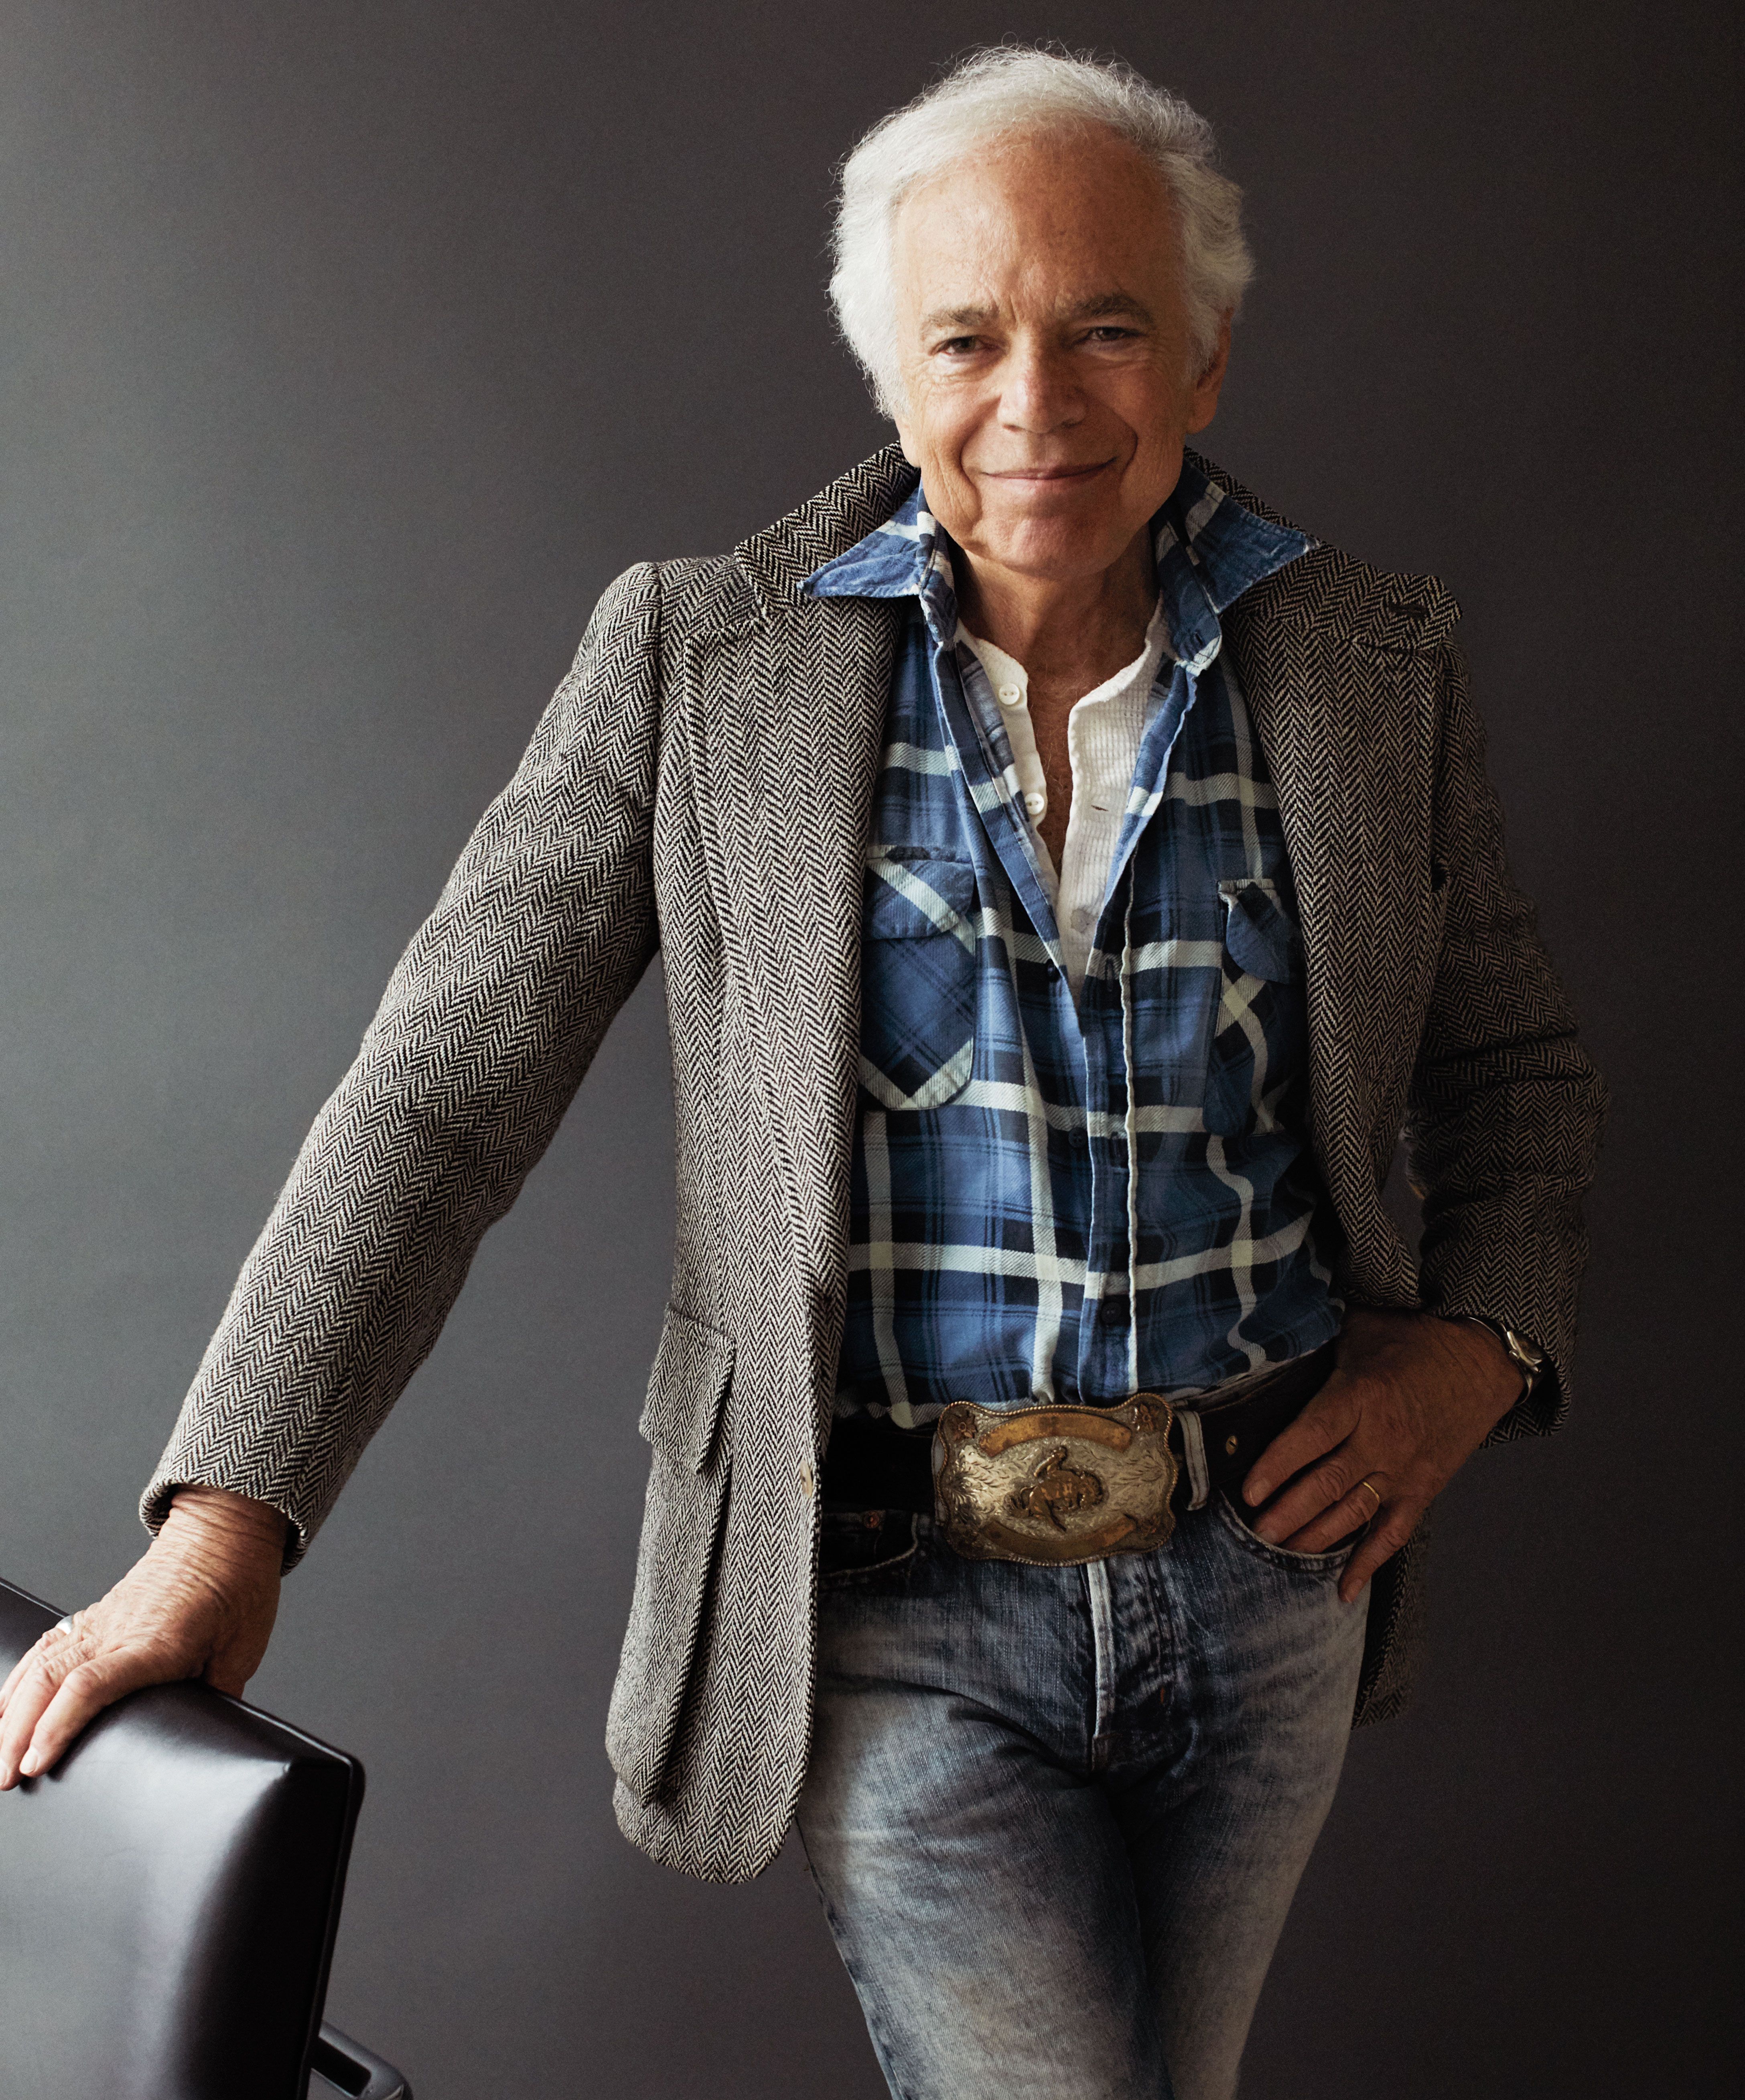 Ralph Lauren Reflects on What It Means 